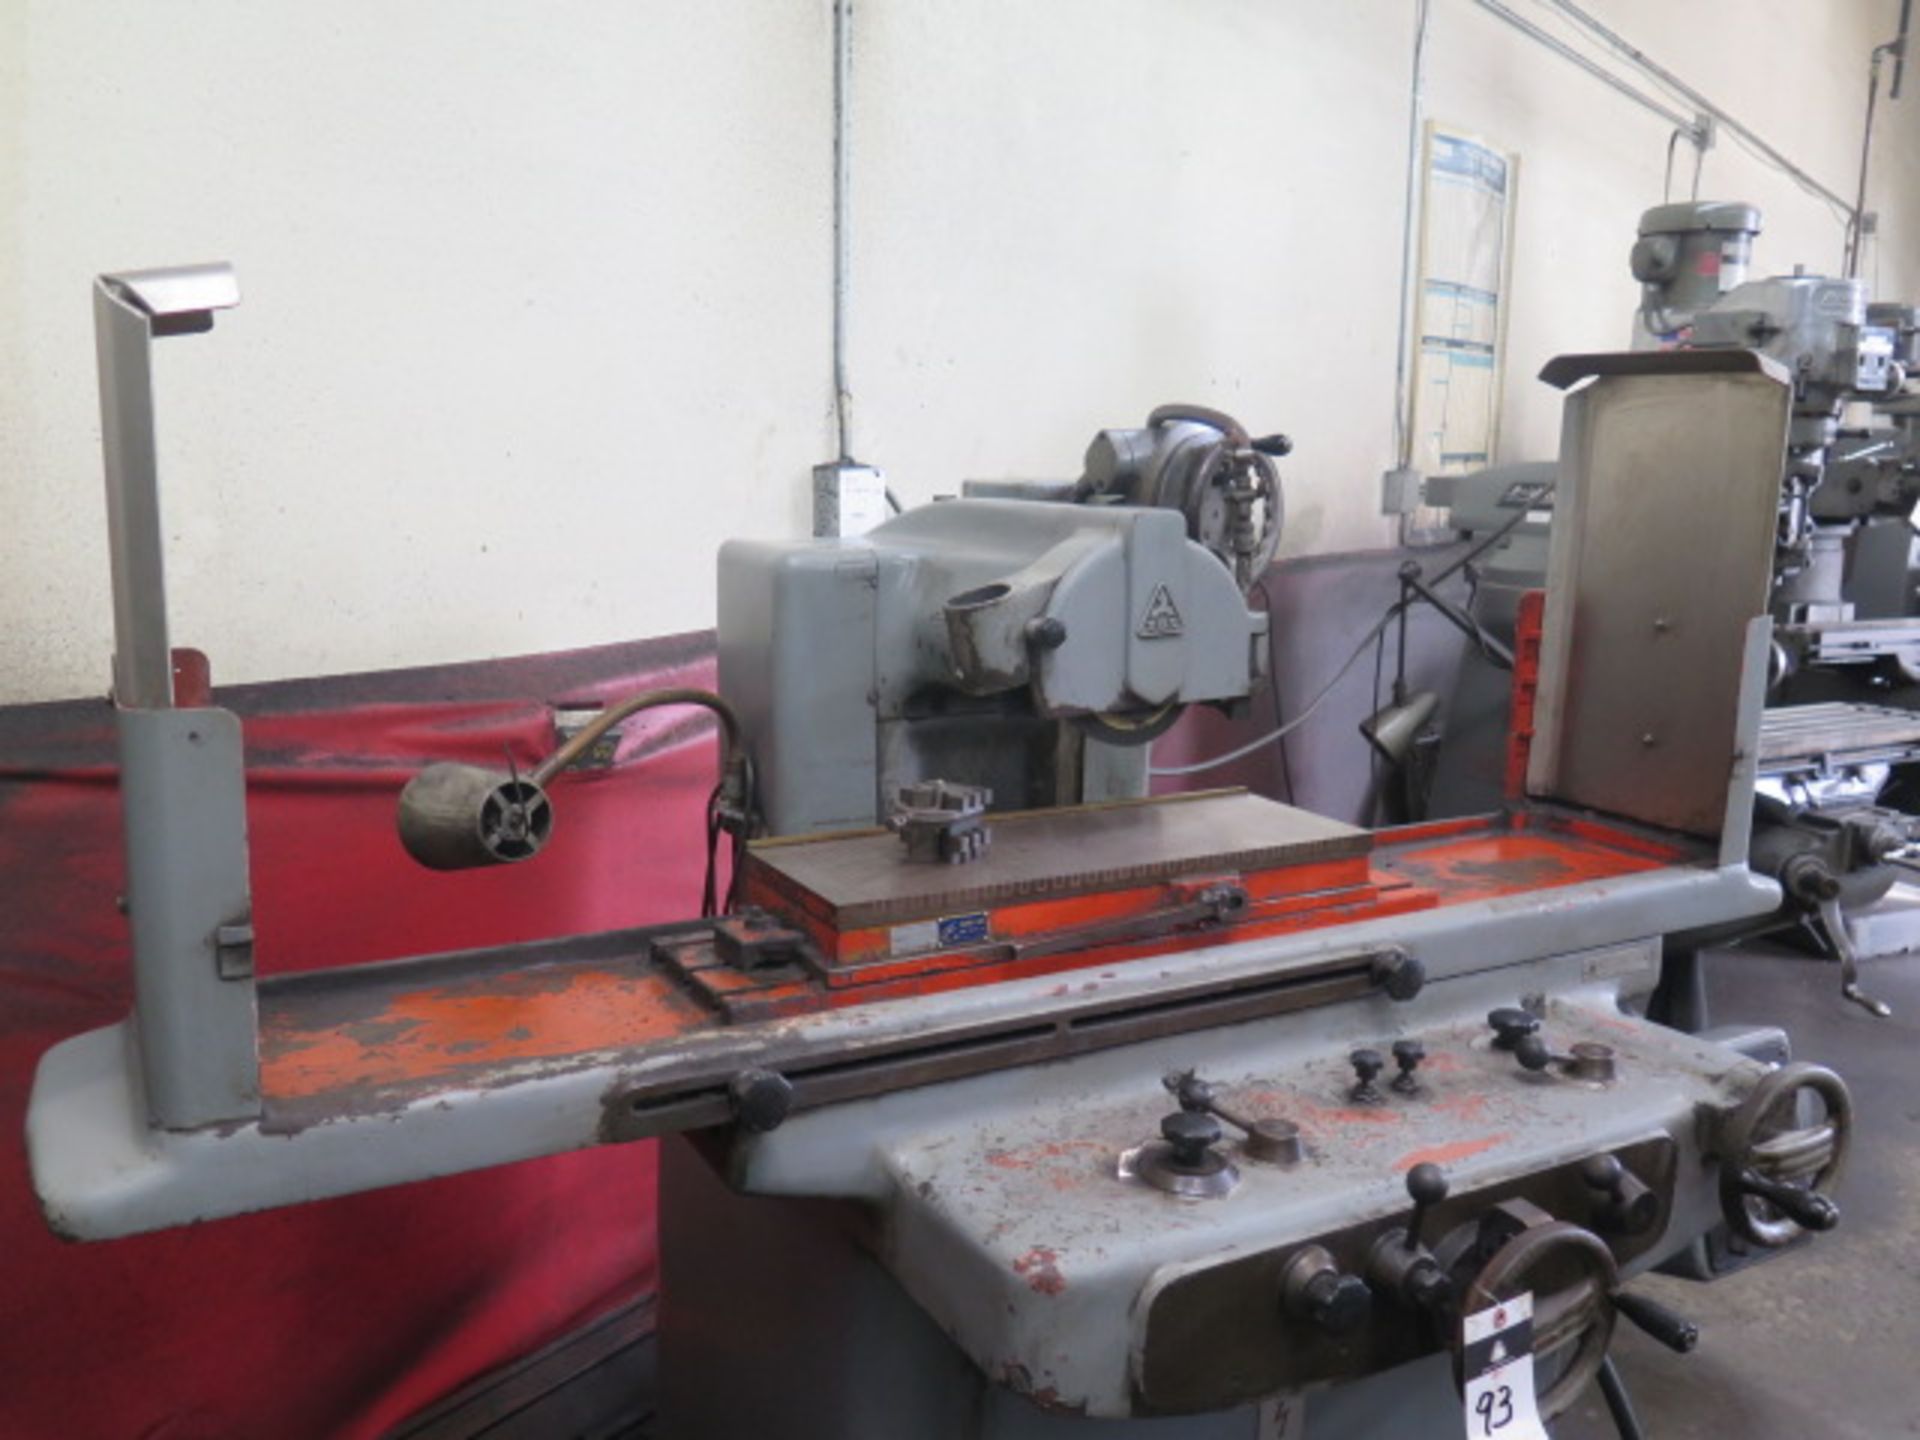 TOS type DPH-20 8” x 24” Automatic Surface Grinder s/n 401808 w/ Magnetic Chuck, Coolant - Image 2 of 7